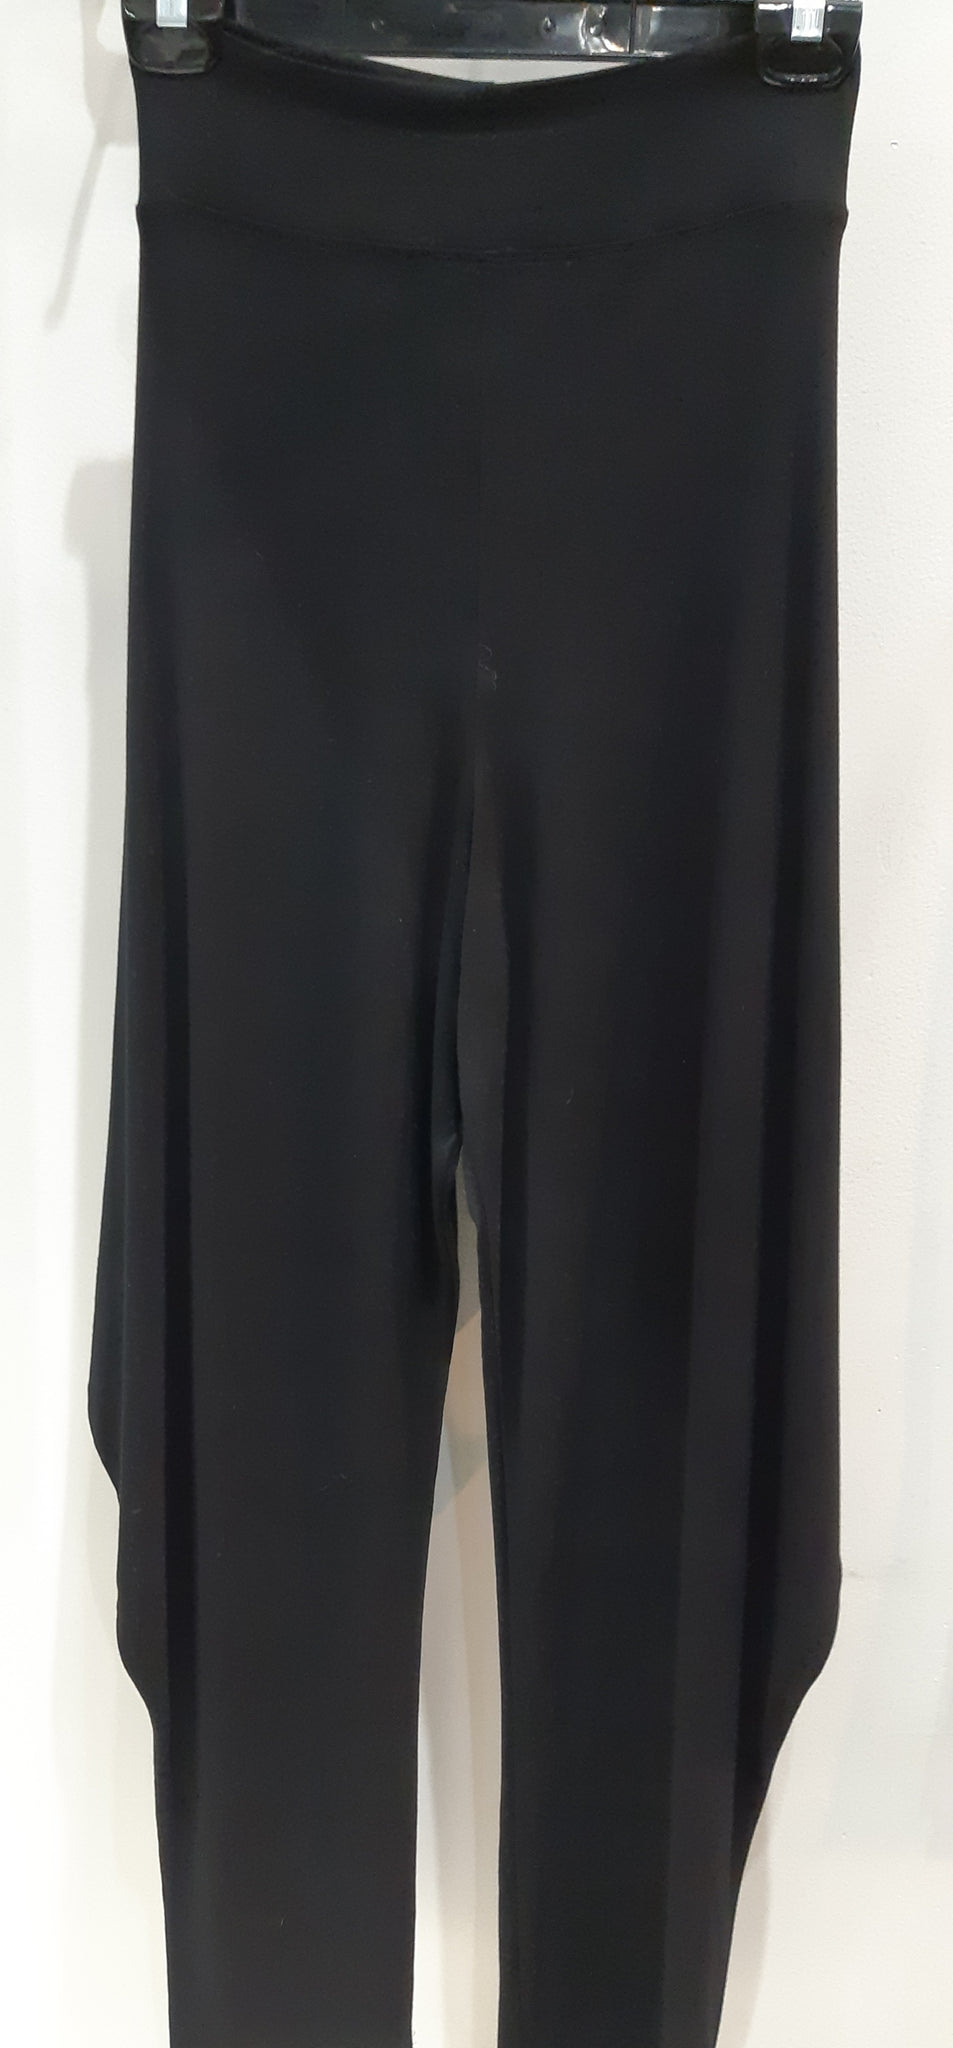 Gilmour Sale, BP-2008 Bamboo Side Drape Pant Additional 50% off